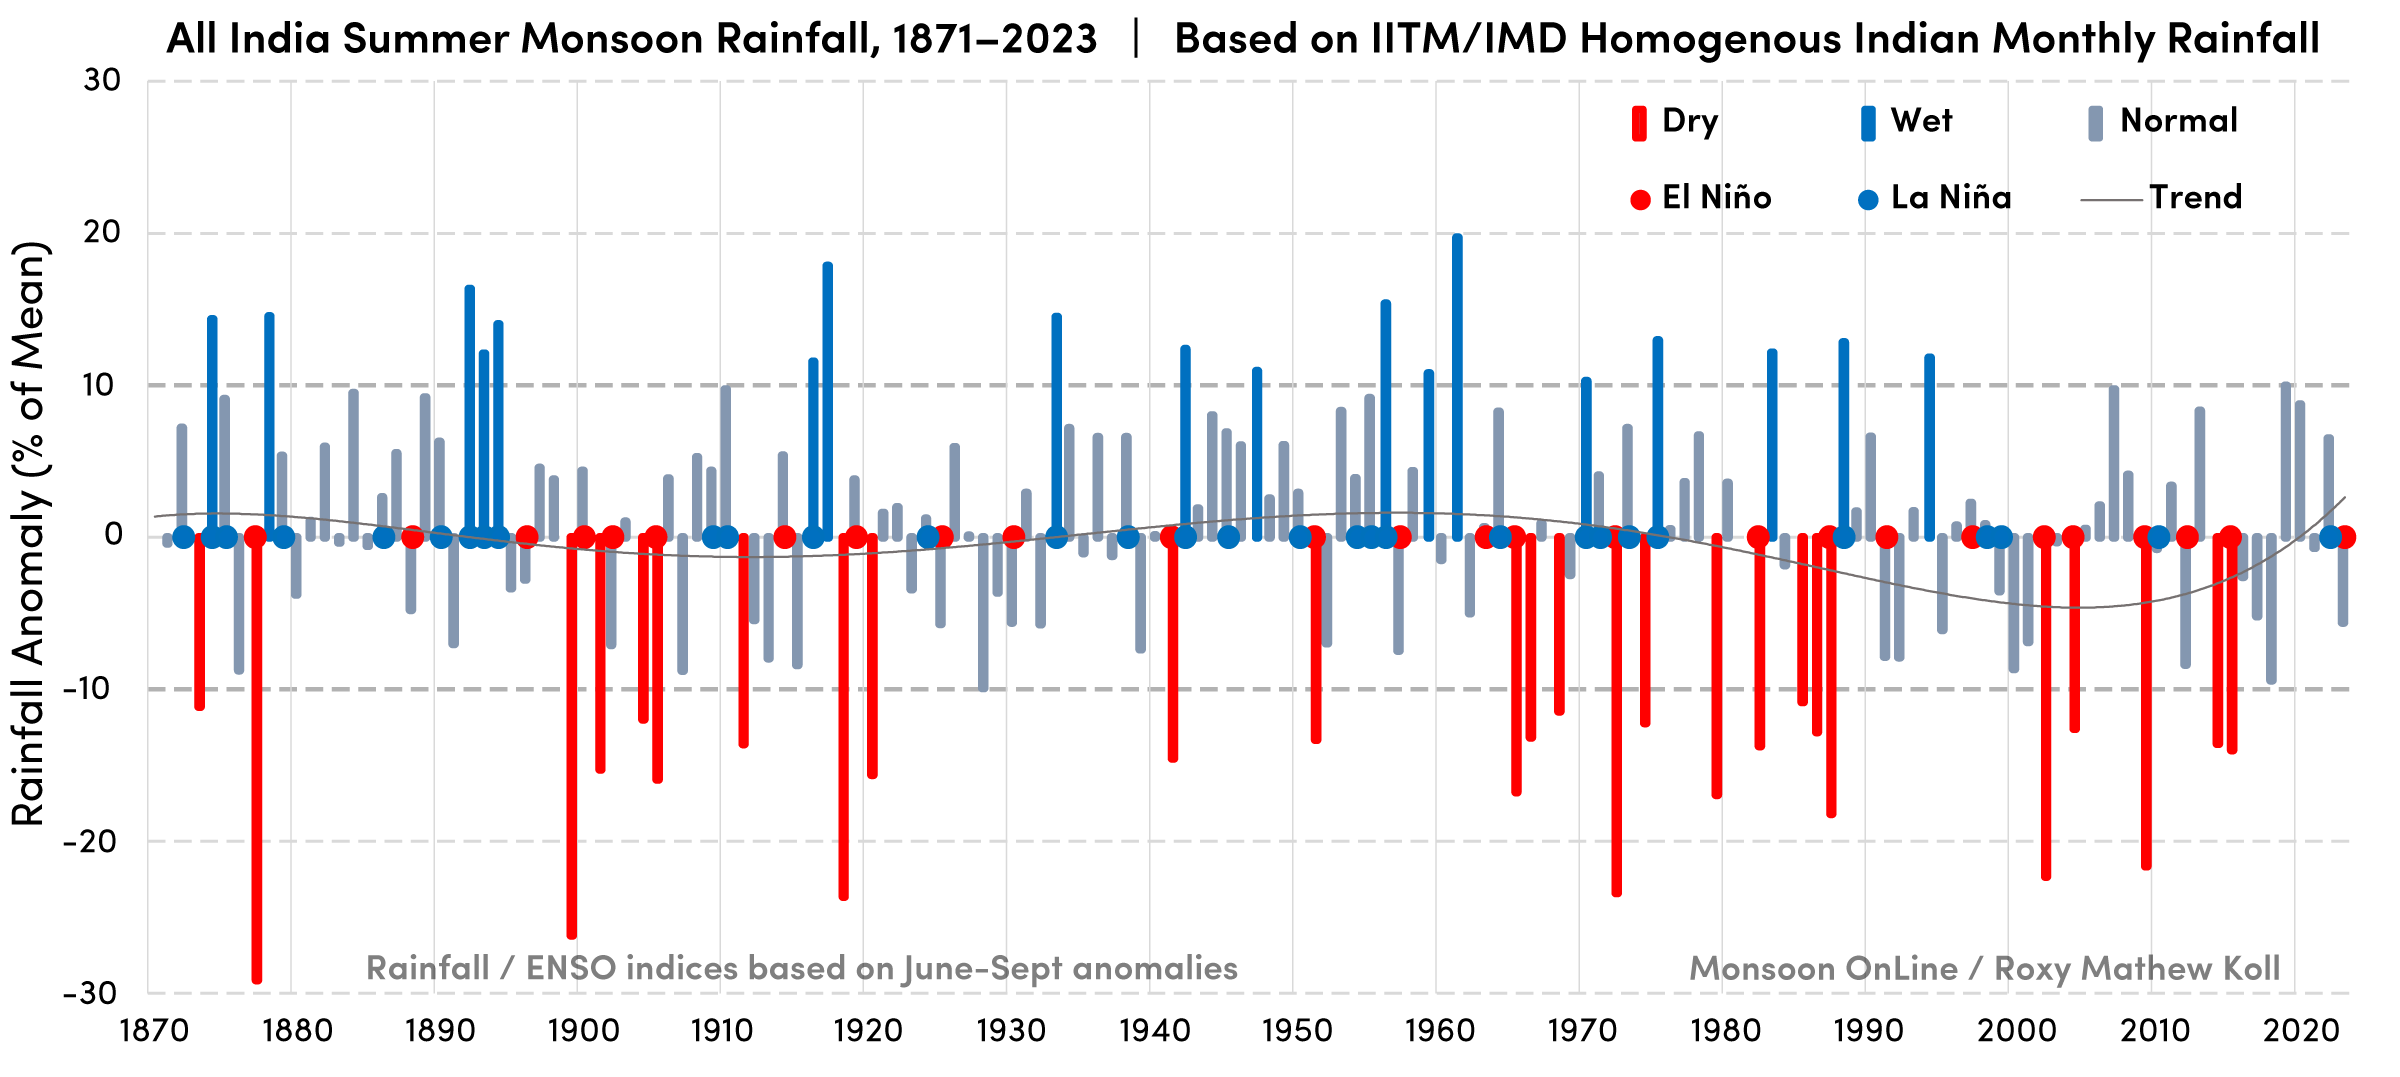 153 years of All India summer monsoon rainfall (1871–2023). Drought years (below -10% departure) are marked in red color and wet years (above 10% departure) are marked in dark blue color. El Niño and La Niña conditions for the monsoon season are marked using red and blue dots.